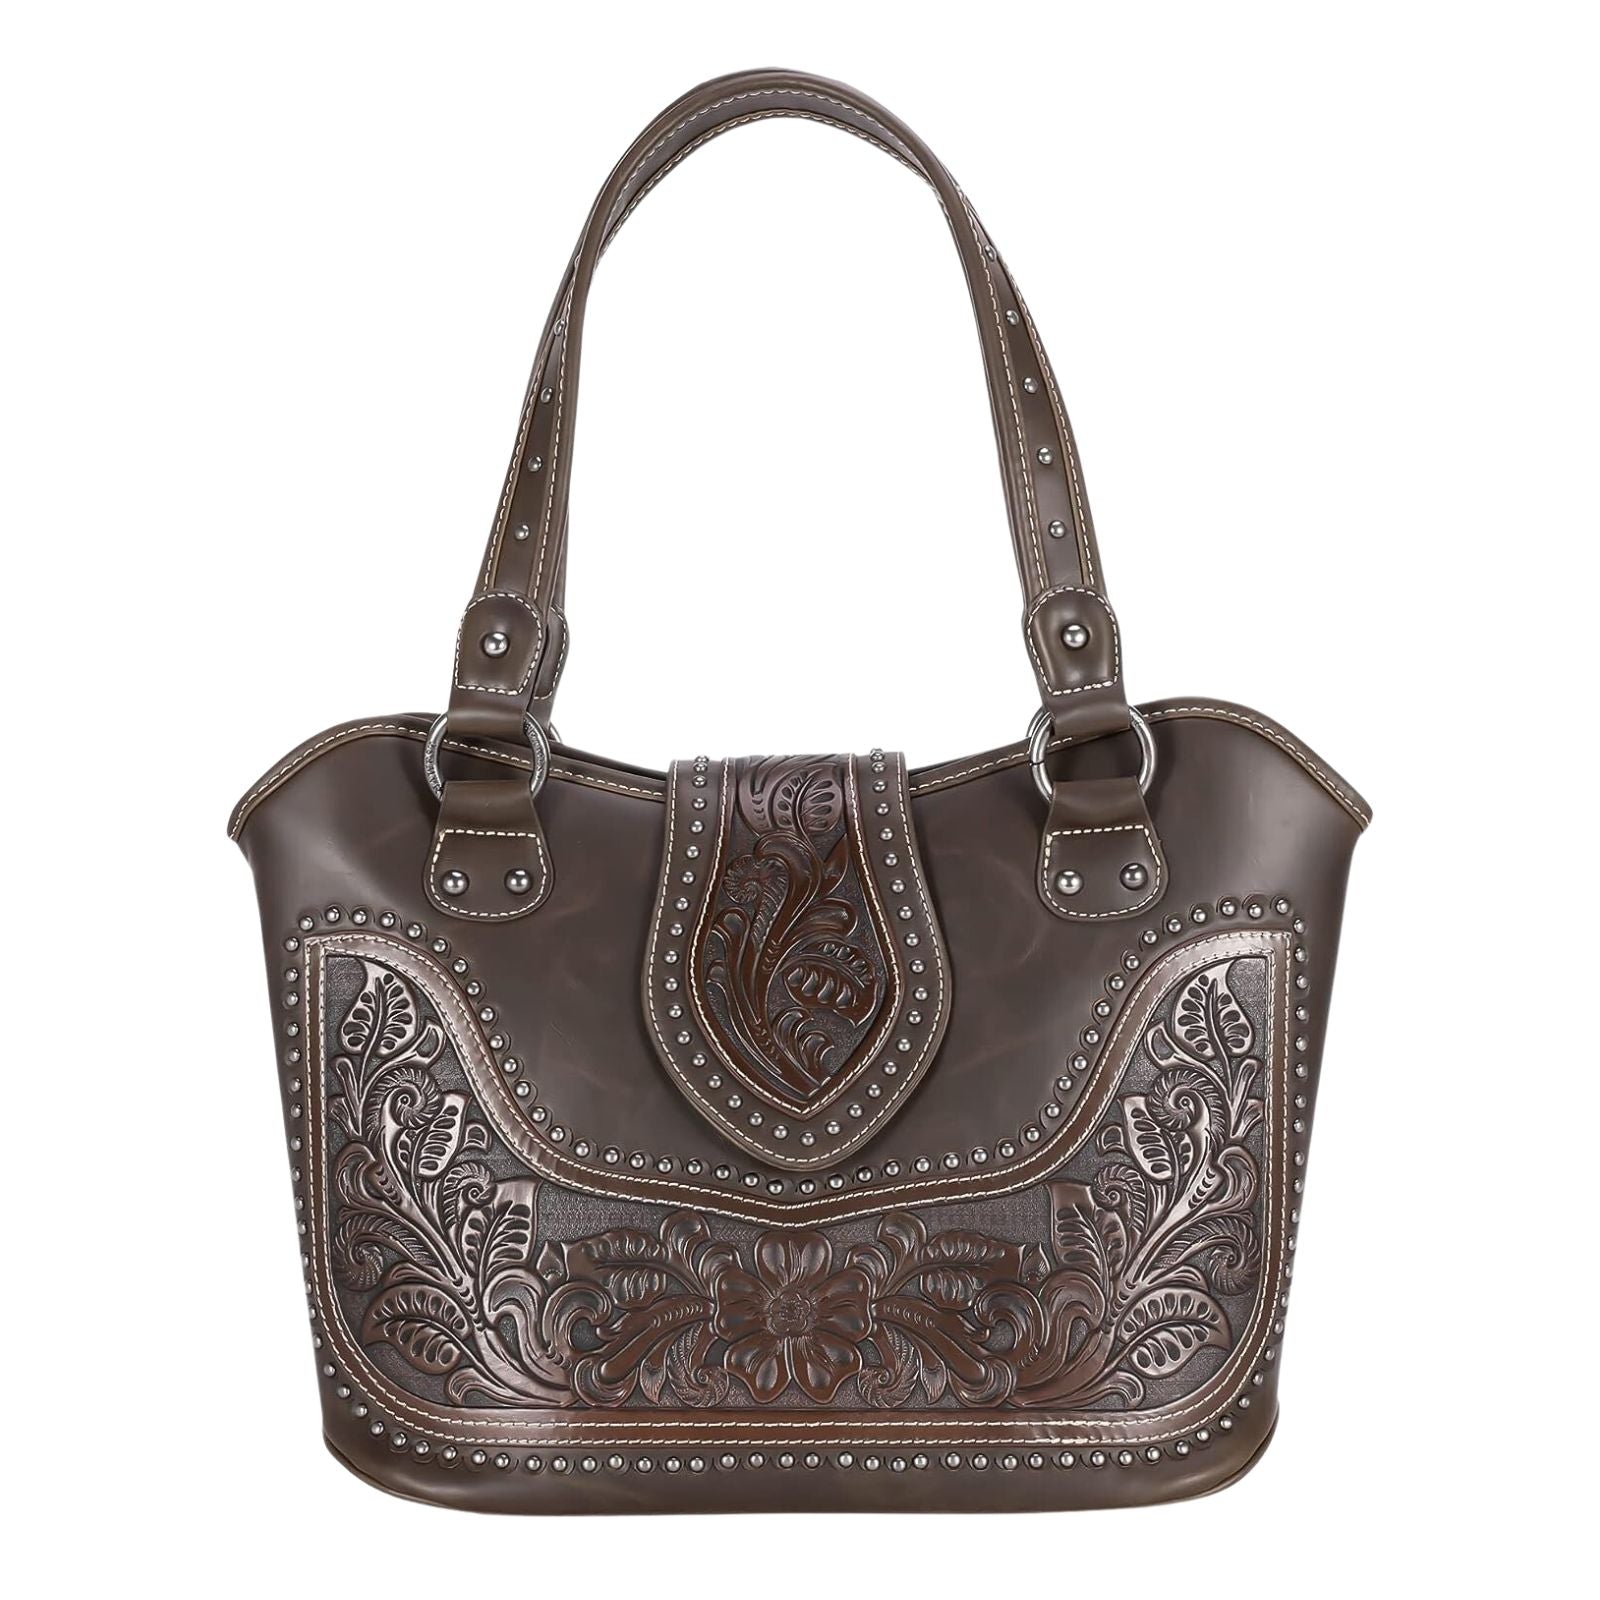 Montana West Tooling Concealed Carry Collection Handbag - Cowgirl Wear